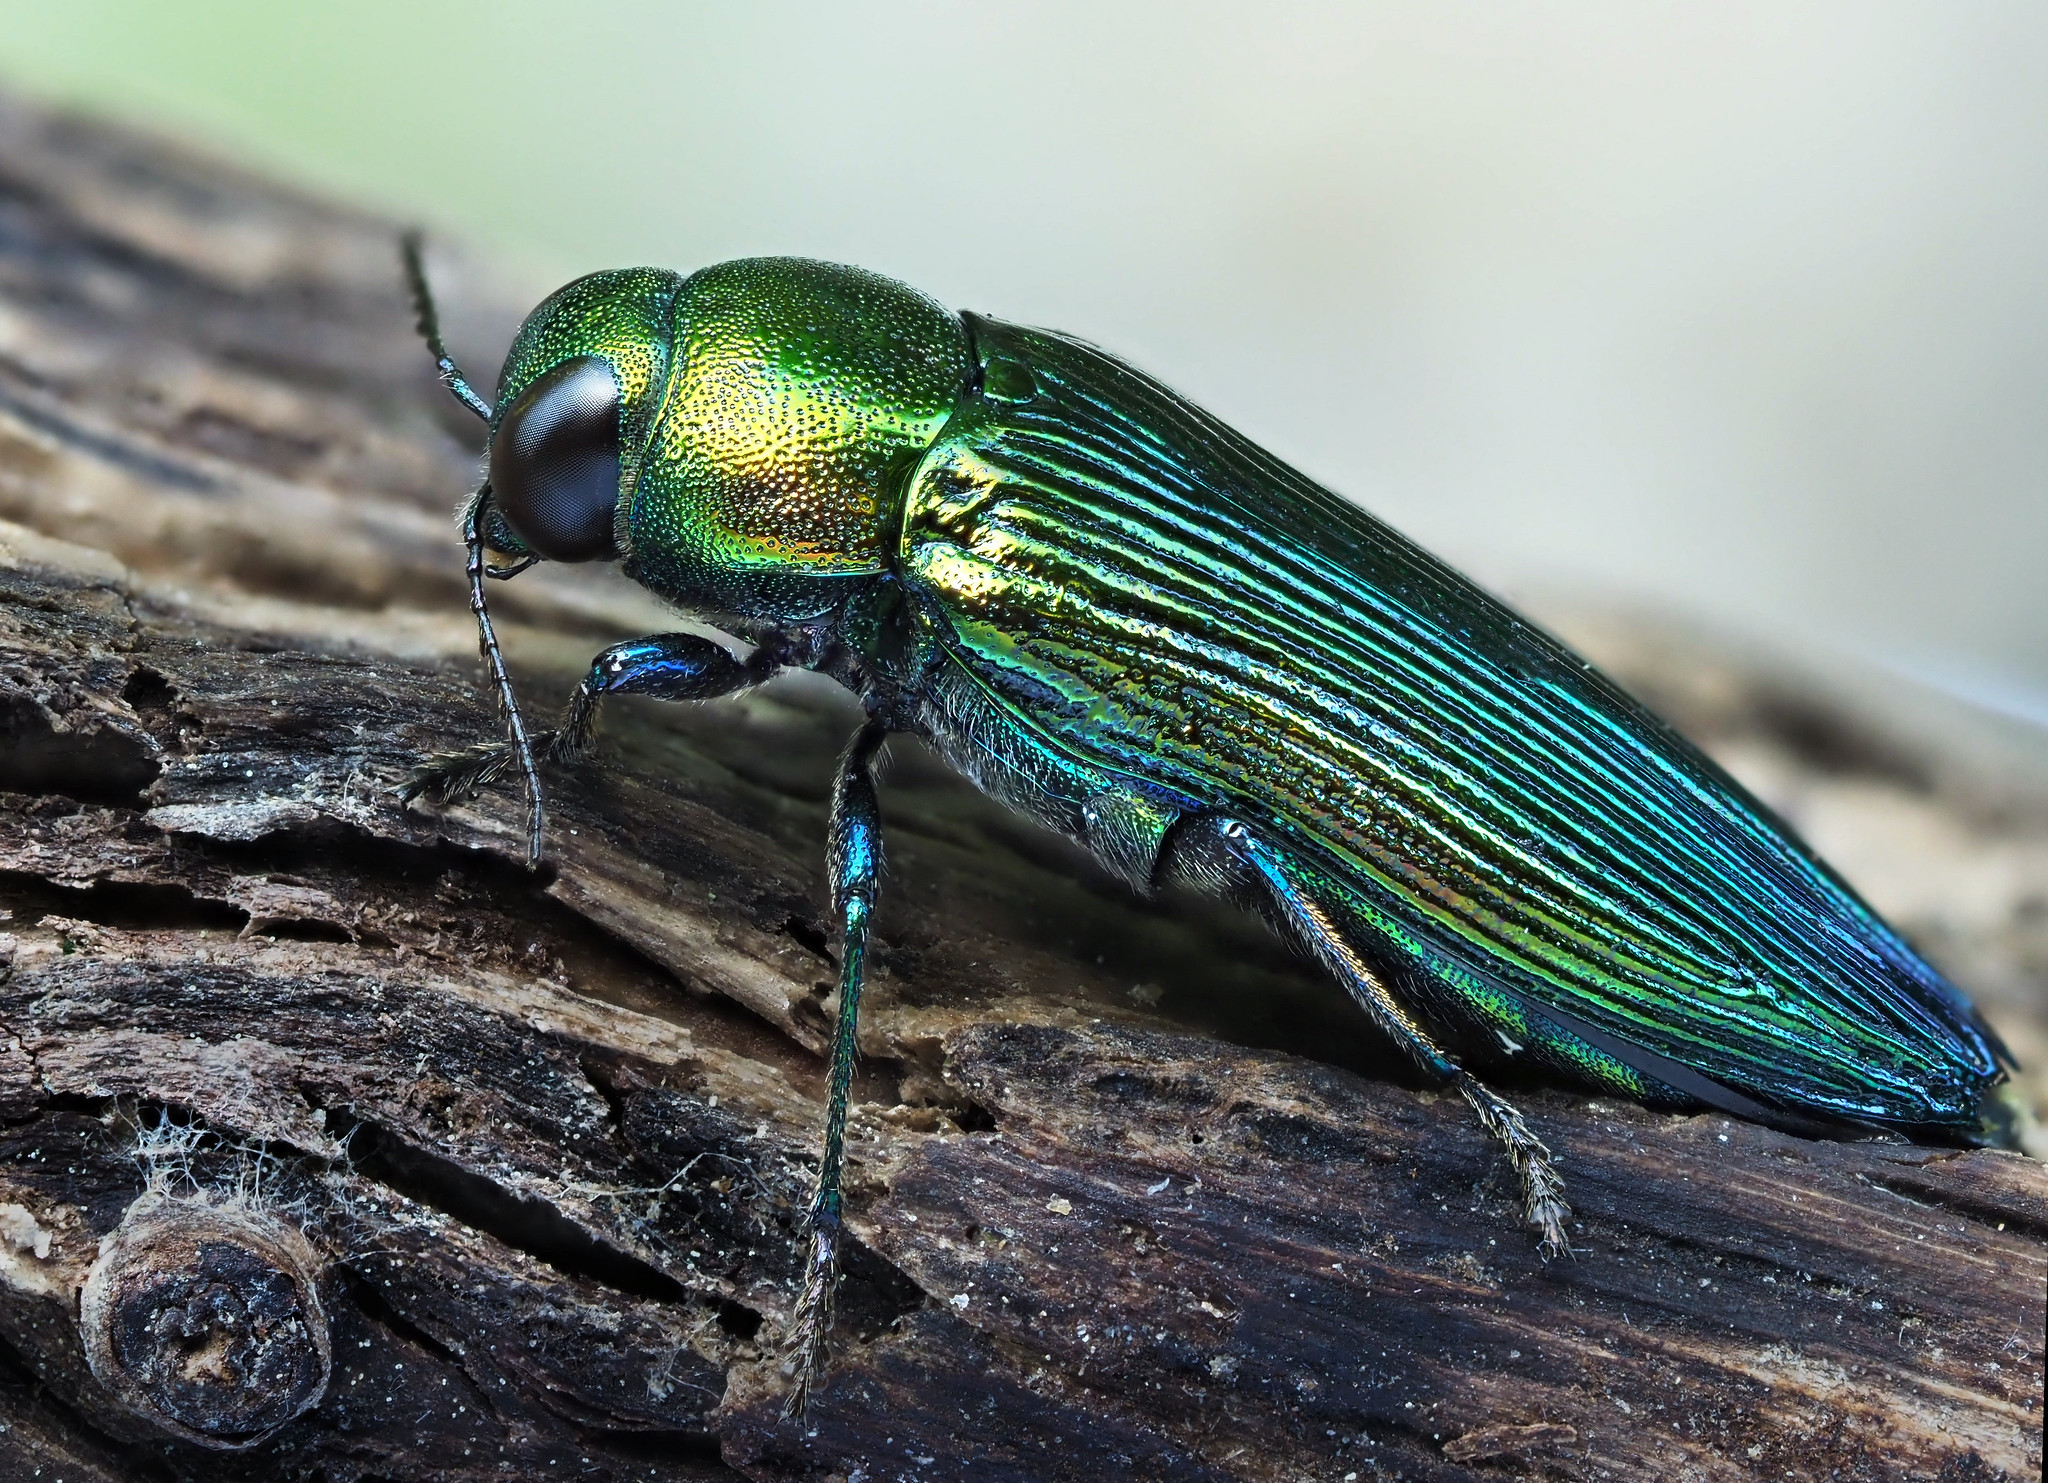 The oak jewel beetle (Eurythyrea quercus) is one of the most endangered beetle species in Europe. It requires old, dry oaks to develop, which are seldom left in the landscape. Photo by Frank Vassen via Flickr (CC BY 2.0)